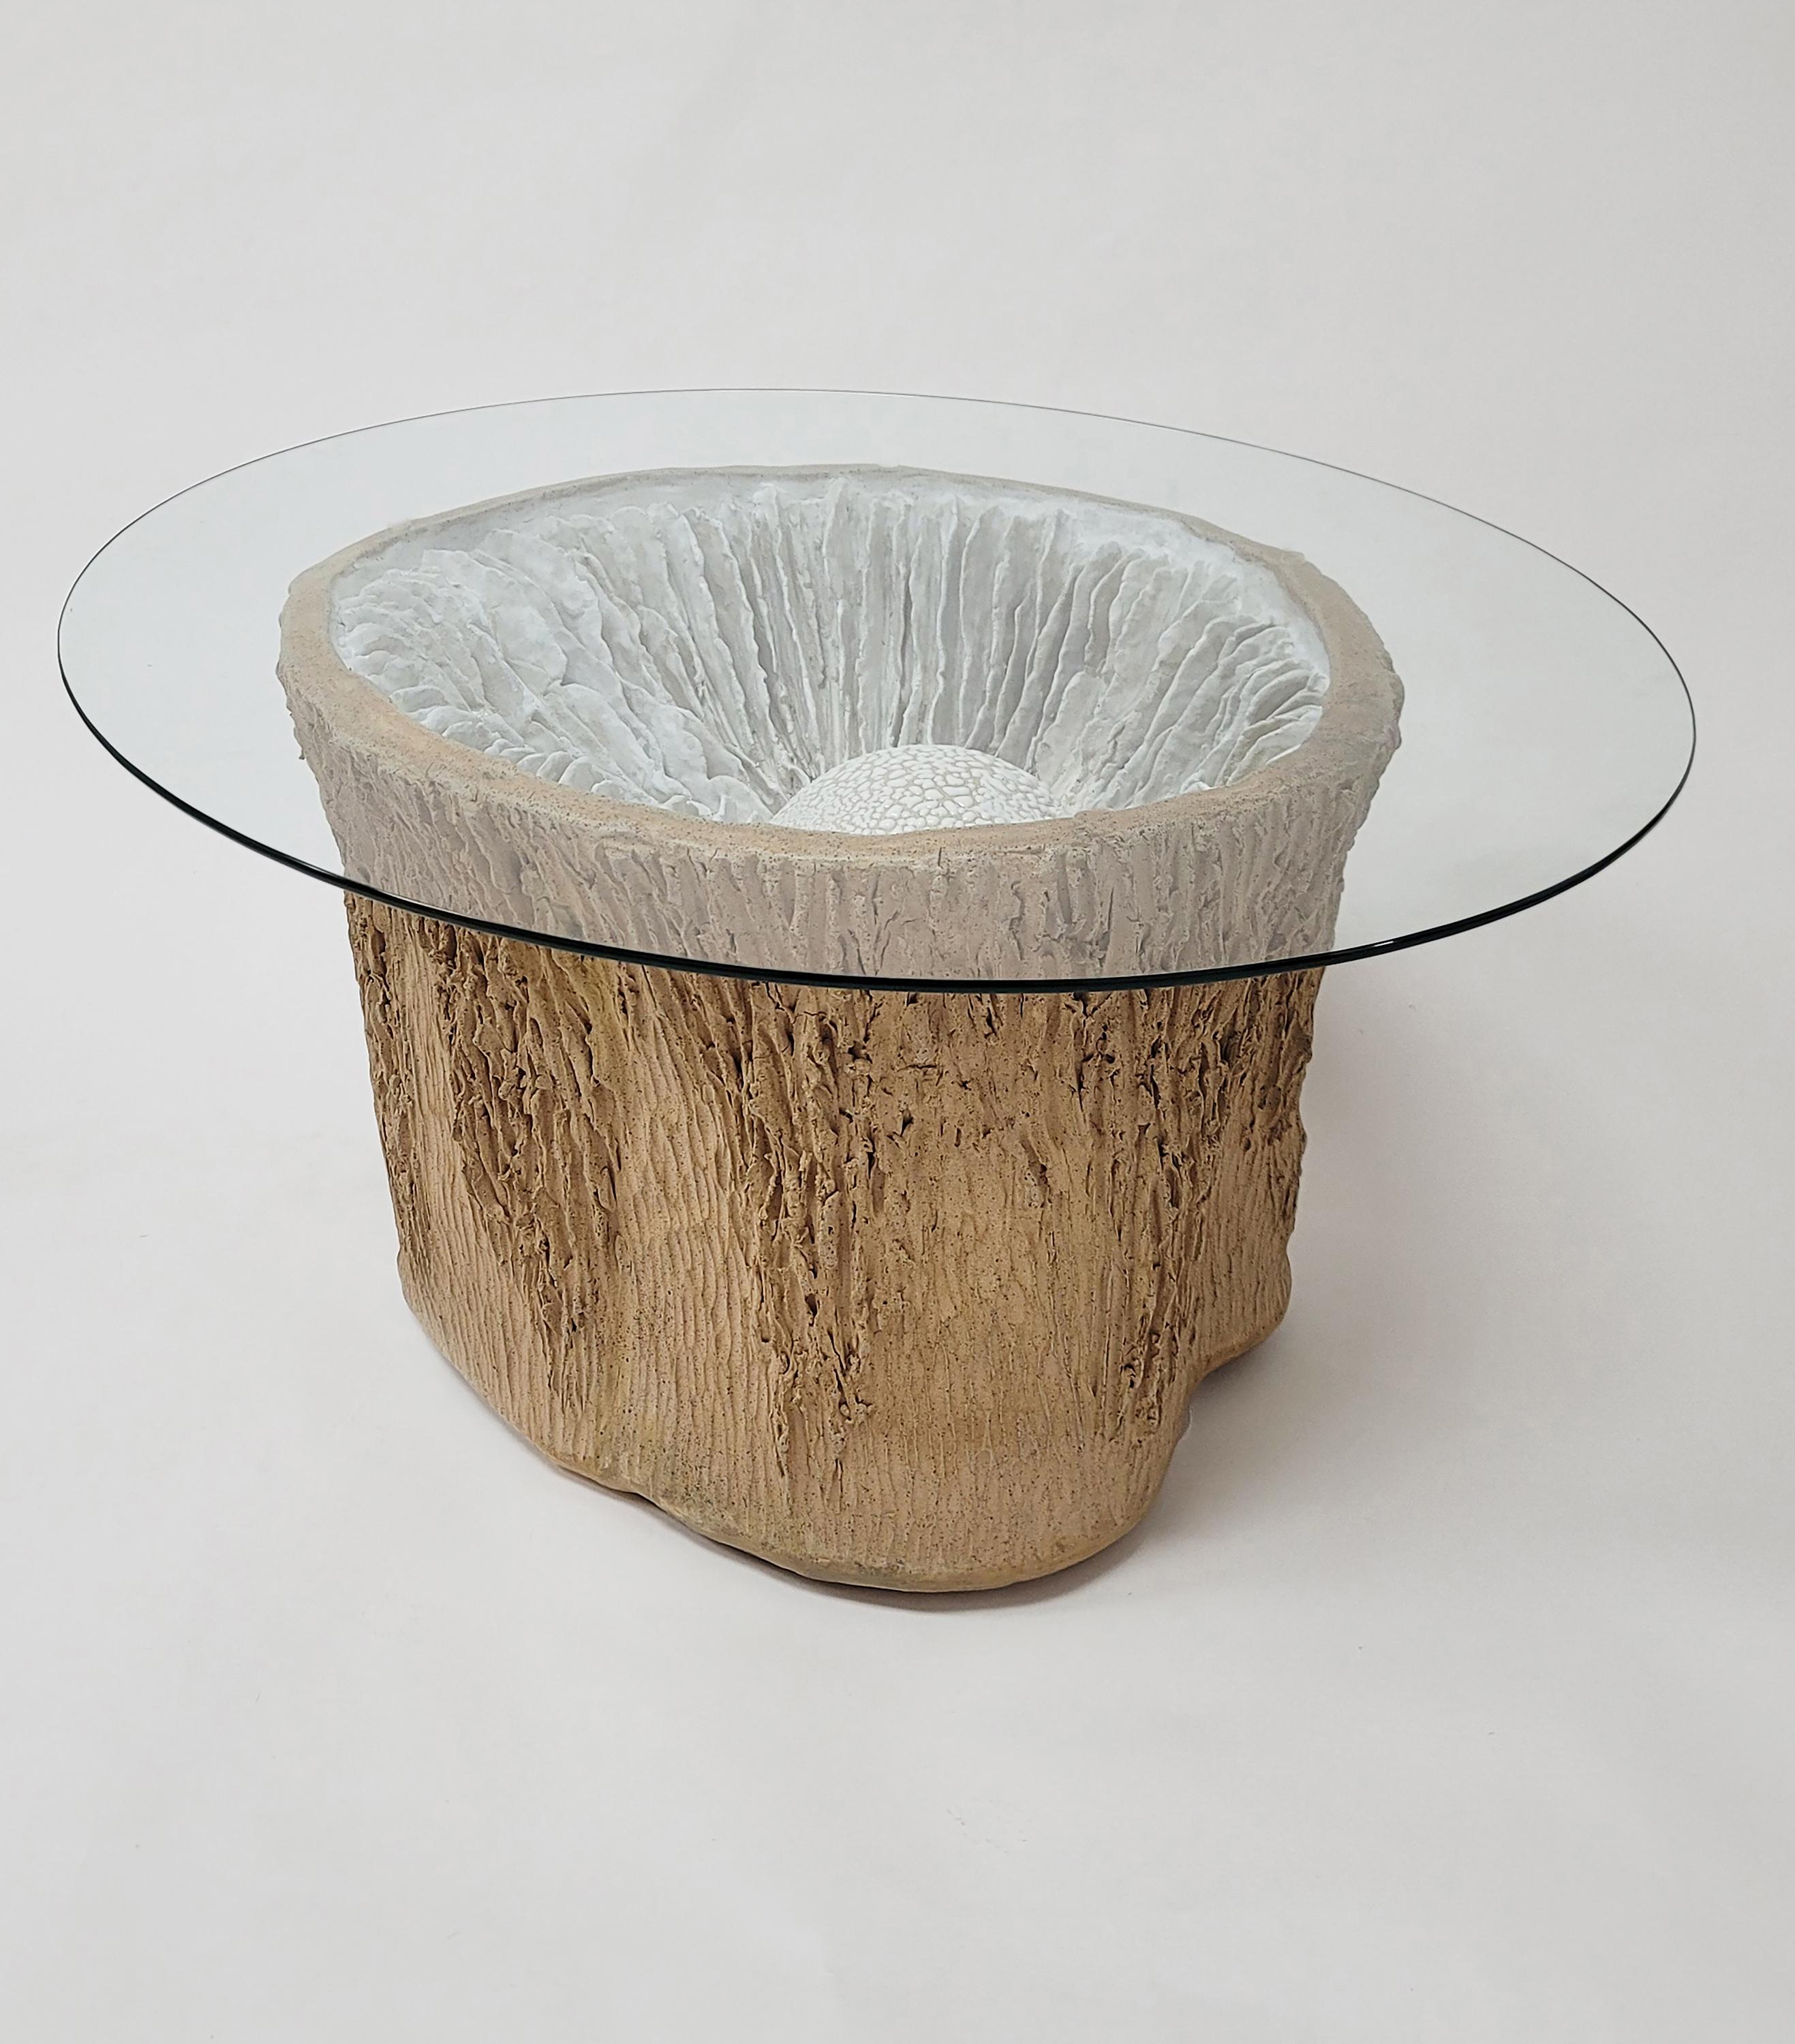 Lamella pod table, 2022
Glazed and raw stoneware with glass top
Measures: 16.5 x 34 x 28 in 
Top: 34 x 28 in; Base: 24 x 20 in.